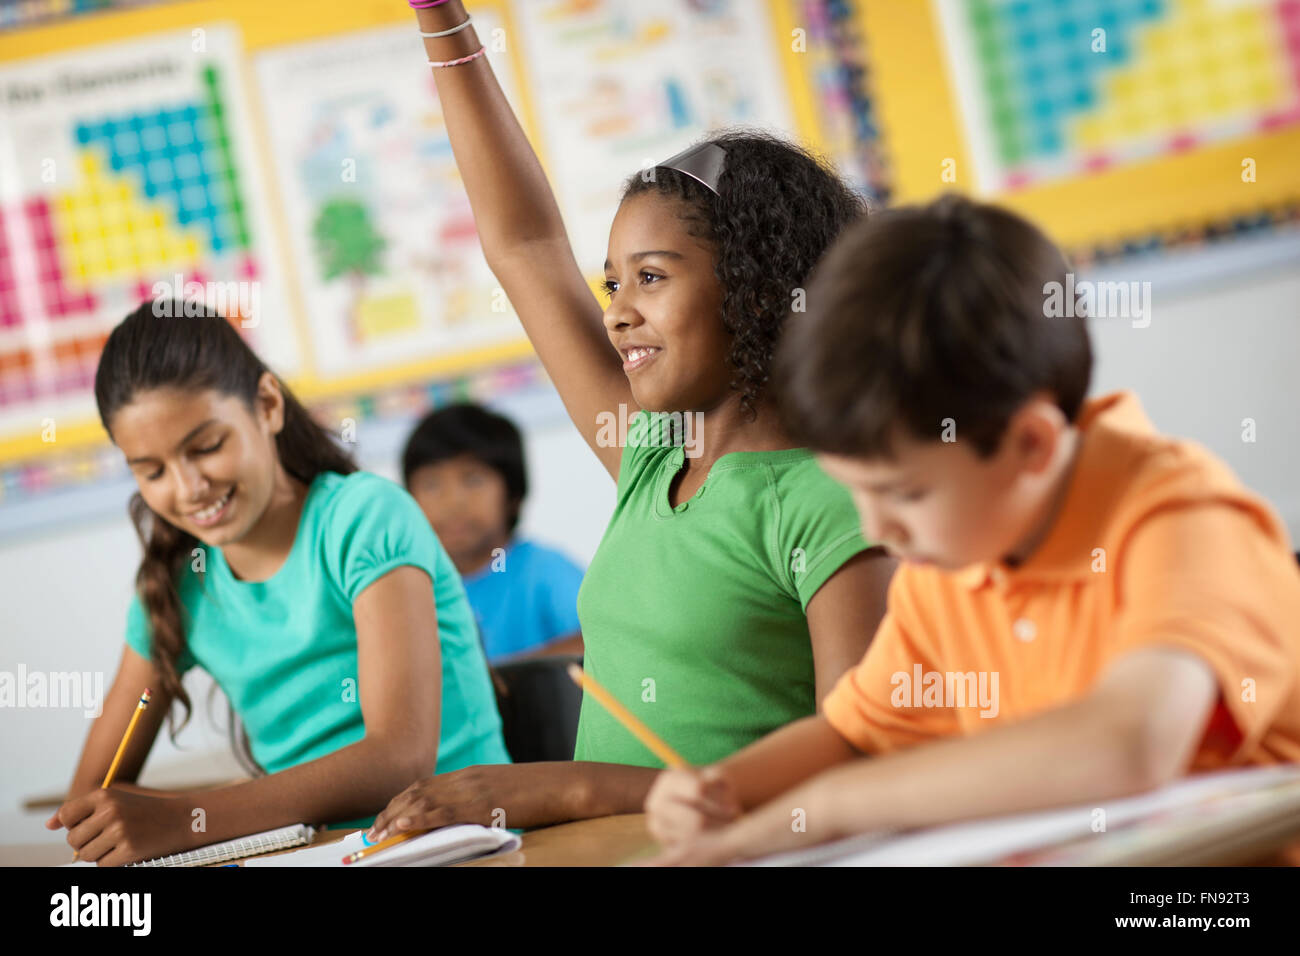 A group of young girls and boys in a classroom, classmates. A girl raising her hand. Stock Photo